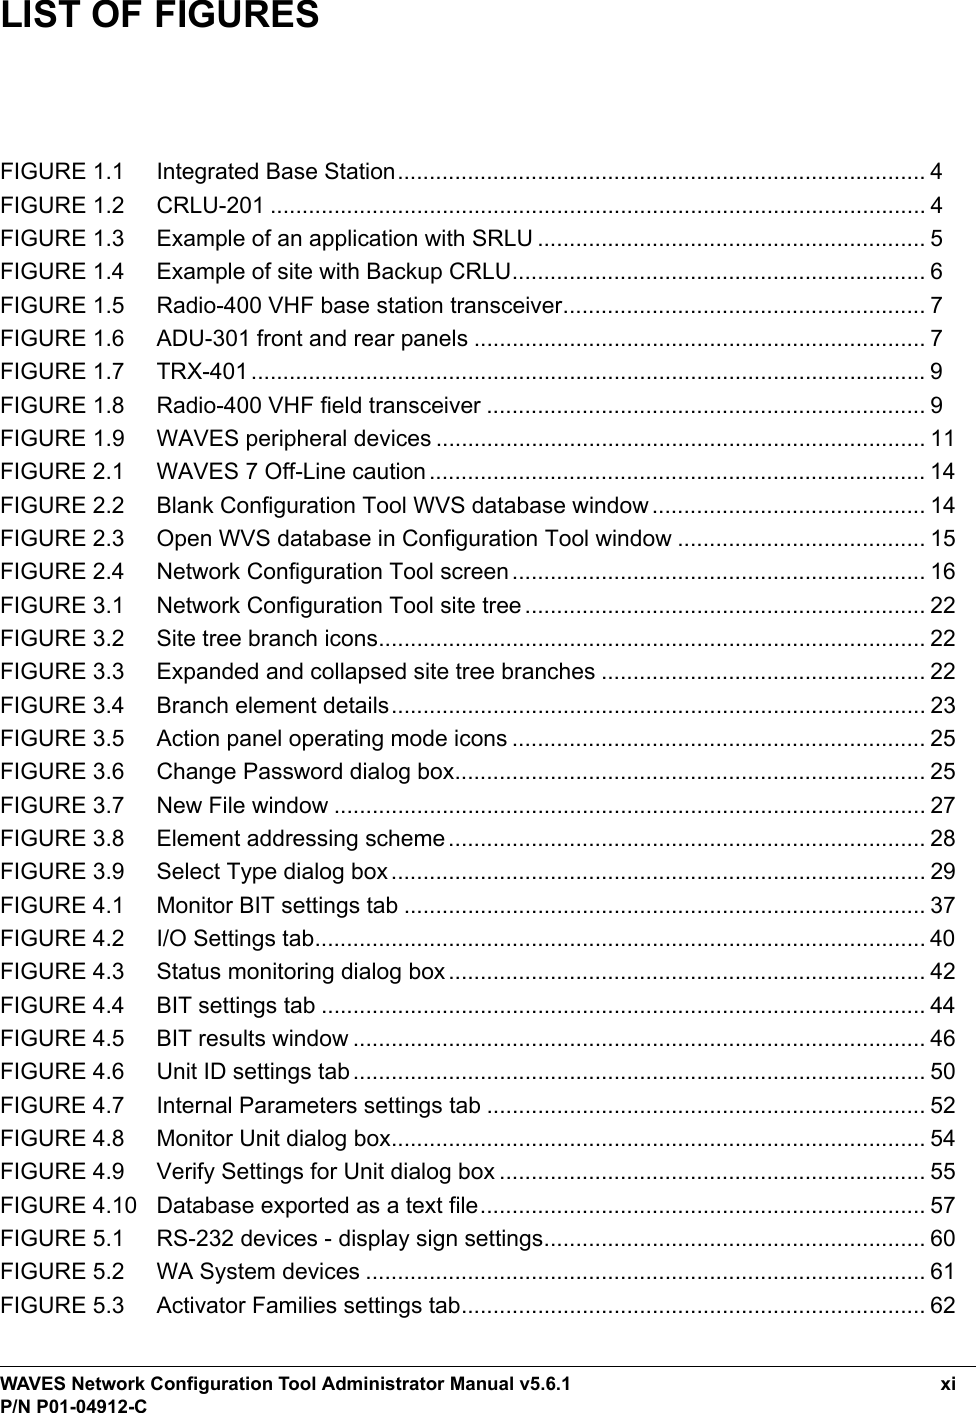 WAVES Network Configuration Tool Administrator Manual v5.6.1 xiP/N P01-04912-CLIST OF FIGURESFIGURE 1.1     Integrated Base Station................................................................................... 4FIGURE 1.2     CRLU-201 ....................................................................................................... 4FIGURE 1.3     Example of an application with SRLU ............................................................. 5FIGURE 1.4     Example of site with Backup CRLU................................................................. 6FIGURE 1.5     Radio-400 VHF base station transceiver......................................................... 7FIGURE 1.6     ADU-301 front and rear panels ....................................................................... 7FIGURE 1.7     TRX-401..........................................................................................................9FIGURE 1.8     Radio-400 VHF field transceiver ..................................................................... 9FIGURE 1.9     WAVES peripheral devices ............................................................................. 11FIGURE 2.1     WAVES 7 Off-Line caution .............................................................................. 14FIGURE 2.2     Blank Configuration Tool WVS database window ........................................... 14FIGURE 2.3     Open WVS database in Configuration Tool window ....................................... 15FIGURE 2.4     Network Configuration Tool screen................................................................. 16FIGURE 3.1     Network Configuration Tool site tree............................................................... 22FIGURE 3.2     Site tree branch icons...................................................................................... 22FIGURE 3.3     Expanded and collapsed site tree branches ................................................... 22FIGURE 3.4     Branch element details.................................................................................... 23FIGURE 3.5     Action panel operating mode icons ................................................................. 25FIGURE 3.6     Change Password dialog box.......................................................................... 25FIGURE 3.7     New File window ............................................................................................. 27FIGURE 3.8     Element addressing scheme........................................................................... 28FIGURE 3.9     Select Type dialog box.................................................................................... 29FIGURE 4.1     Monitor BIT settings tab .................................................................................. 37FIGURE 4.2     I/O Settings tab................................................................................................ 40FIGURE 4.3     Status monitoring dialog box........................................................................... 42FIGURE 4.4     BIT settings tab ............................................................................................... 44FIGURE 4.5     BIT results window .......................................................................................... 46FIGURE 4.6     Unit ID settings tab.......................................................................................... 50FIGURE 4.7     Internal Parameters settings tab ..................................................................... 52FIGURE 4.8     Monitor Unit dialog box.................................................................................... 54FIGURE 4.9     Verify Settings for Unit dialog box ................................................................... 55FIGURE 4.10   Database exported as a text file...................................................................... 57FIGURE 5.1     RS-232 devices - display sign settings............................................................ 60FIGURE 5.2     WA System devices ........................................................................................ 61FIGURE 5.3     Activator Families settings tab......................................................................... 62